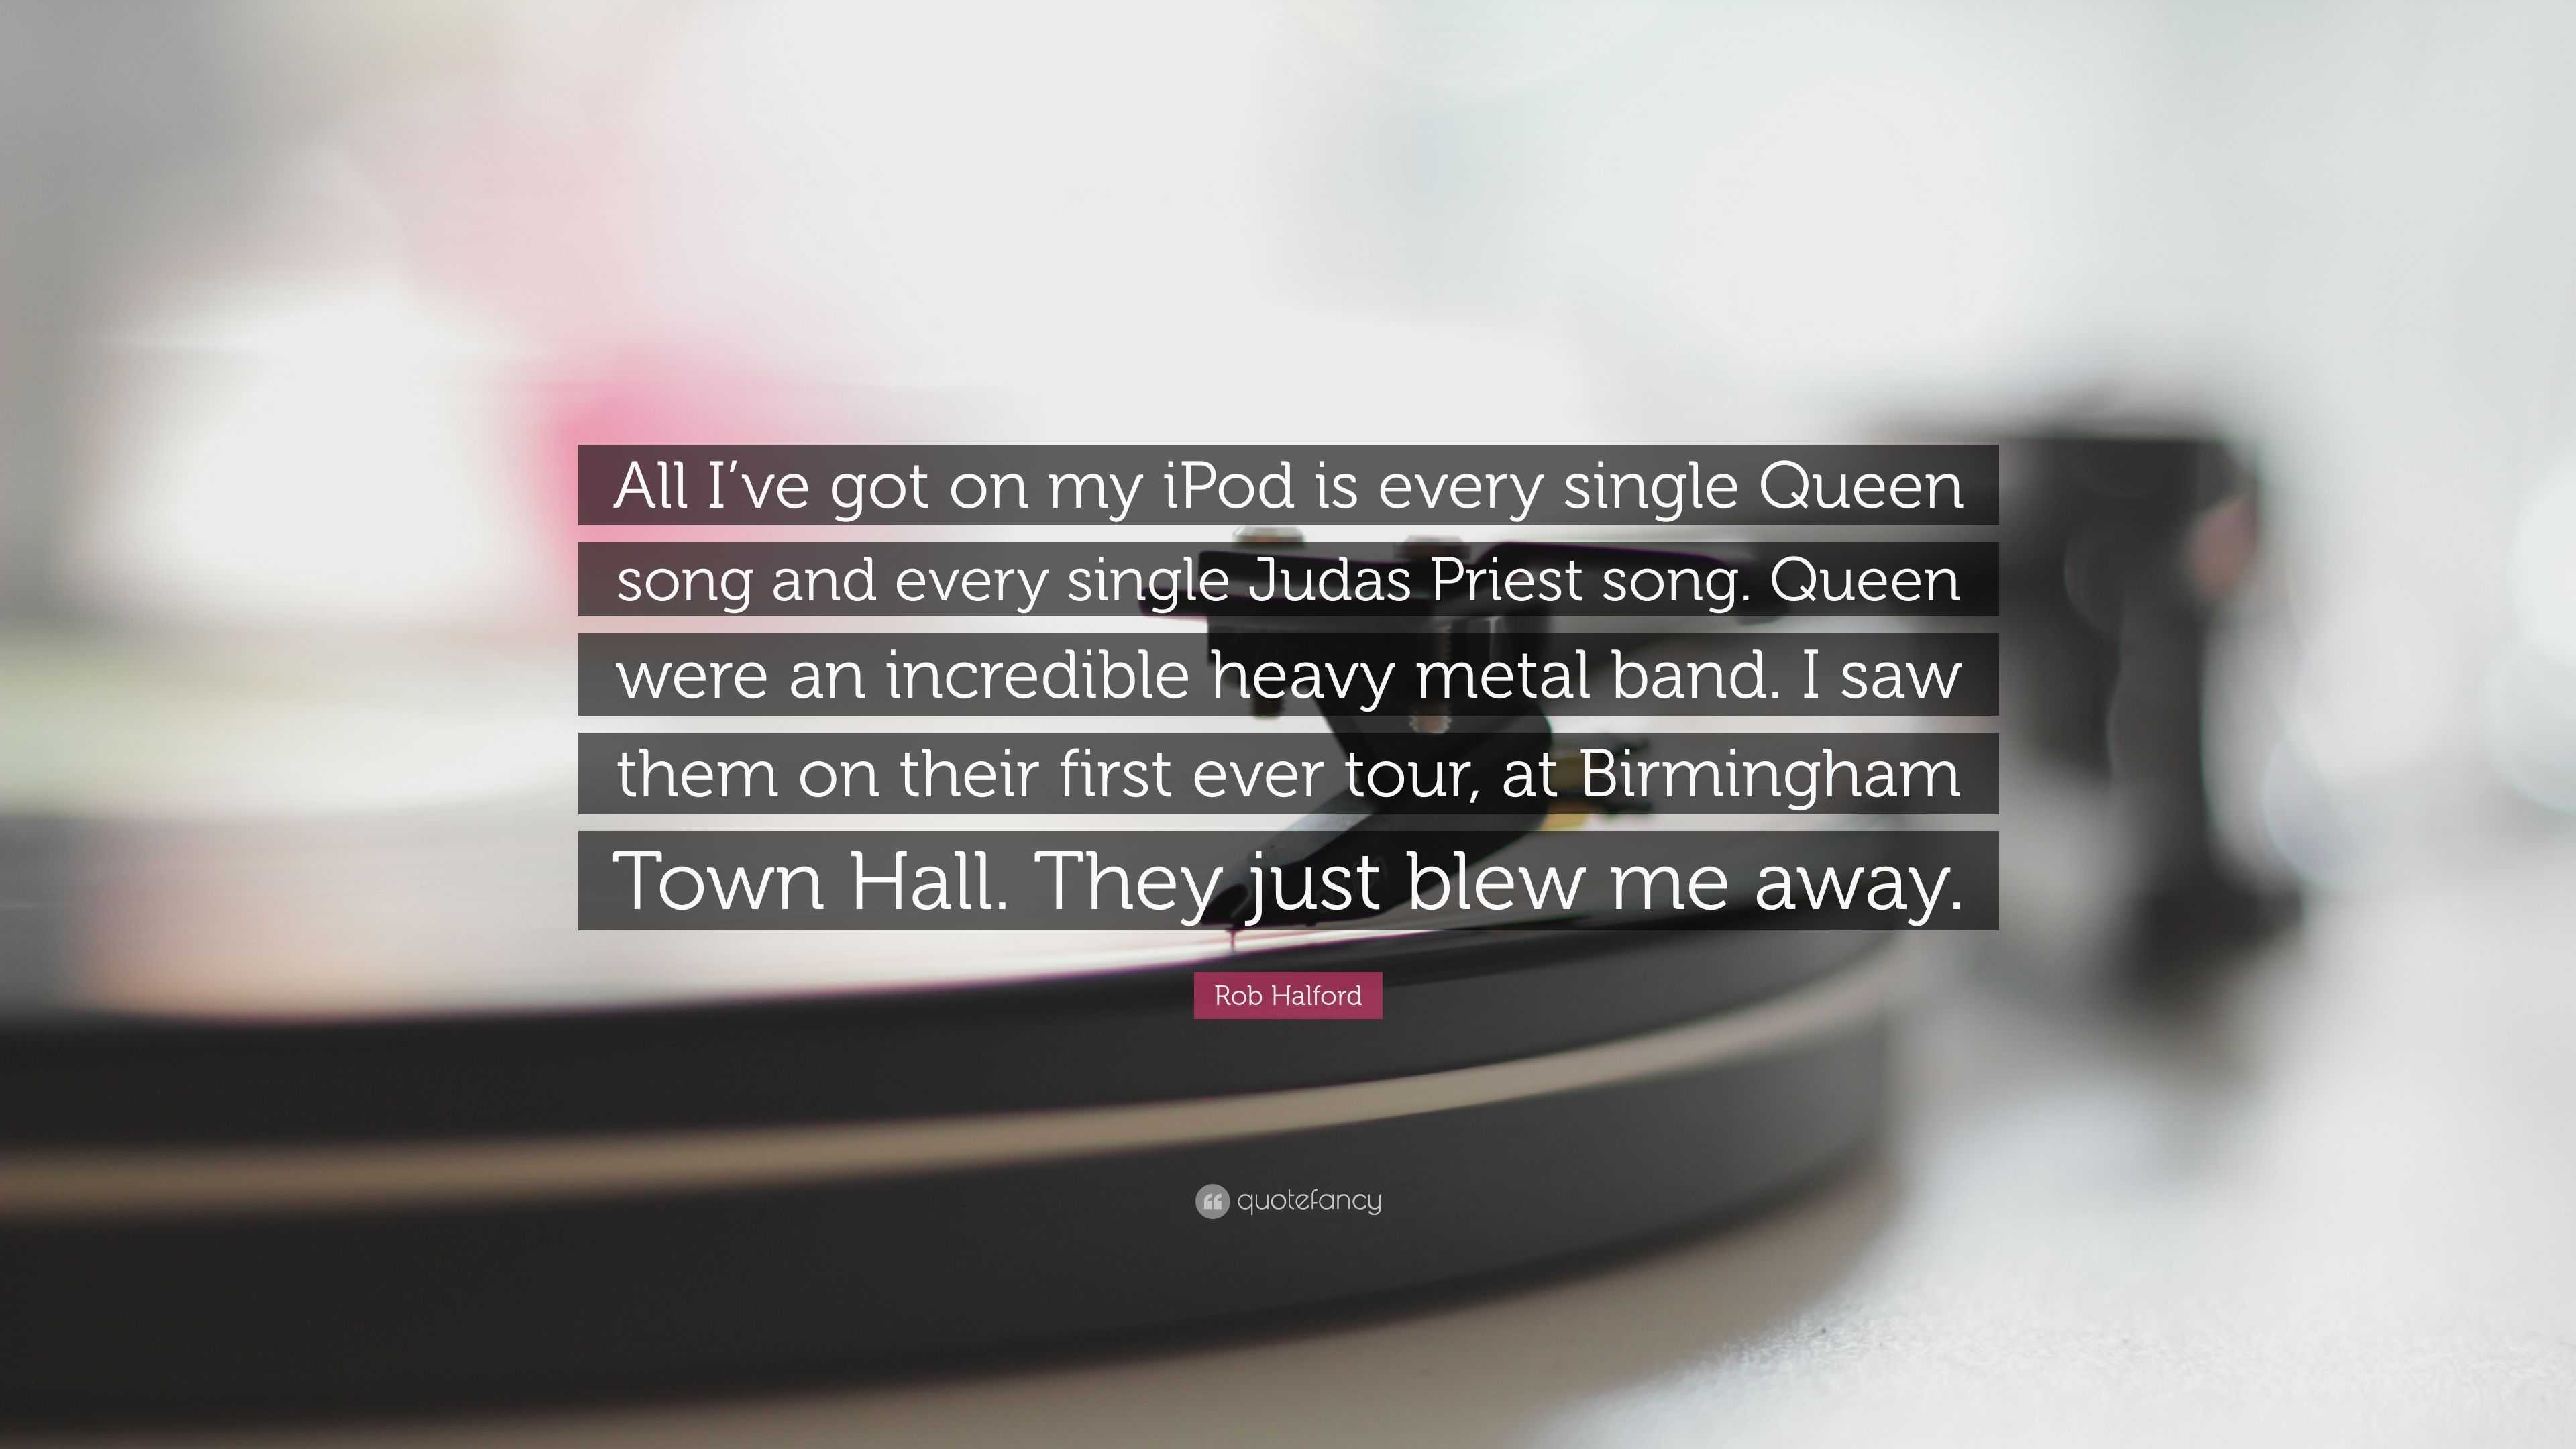 Rob Halford Quote: “All I've got on my iPod is every single Queen